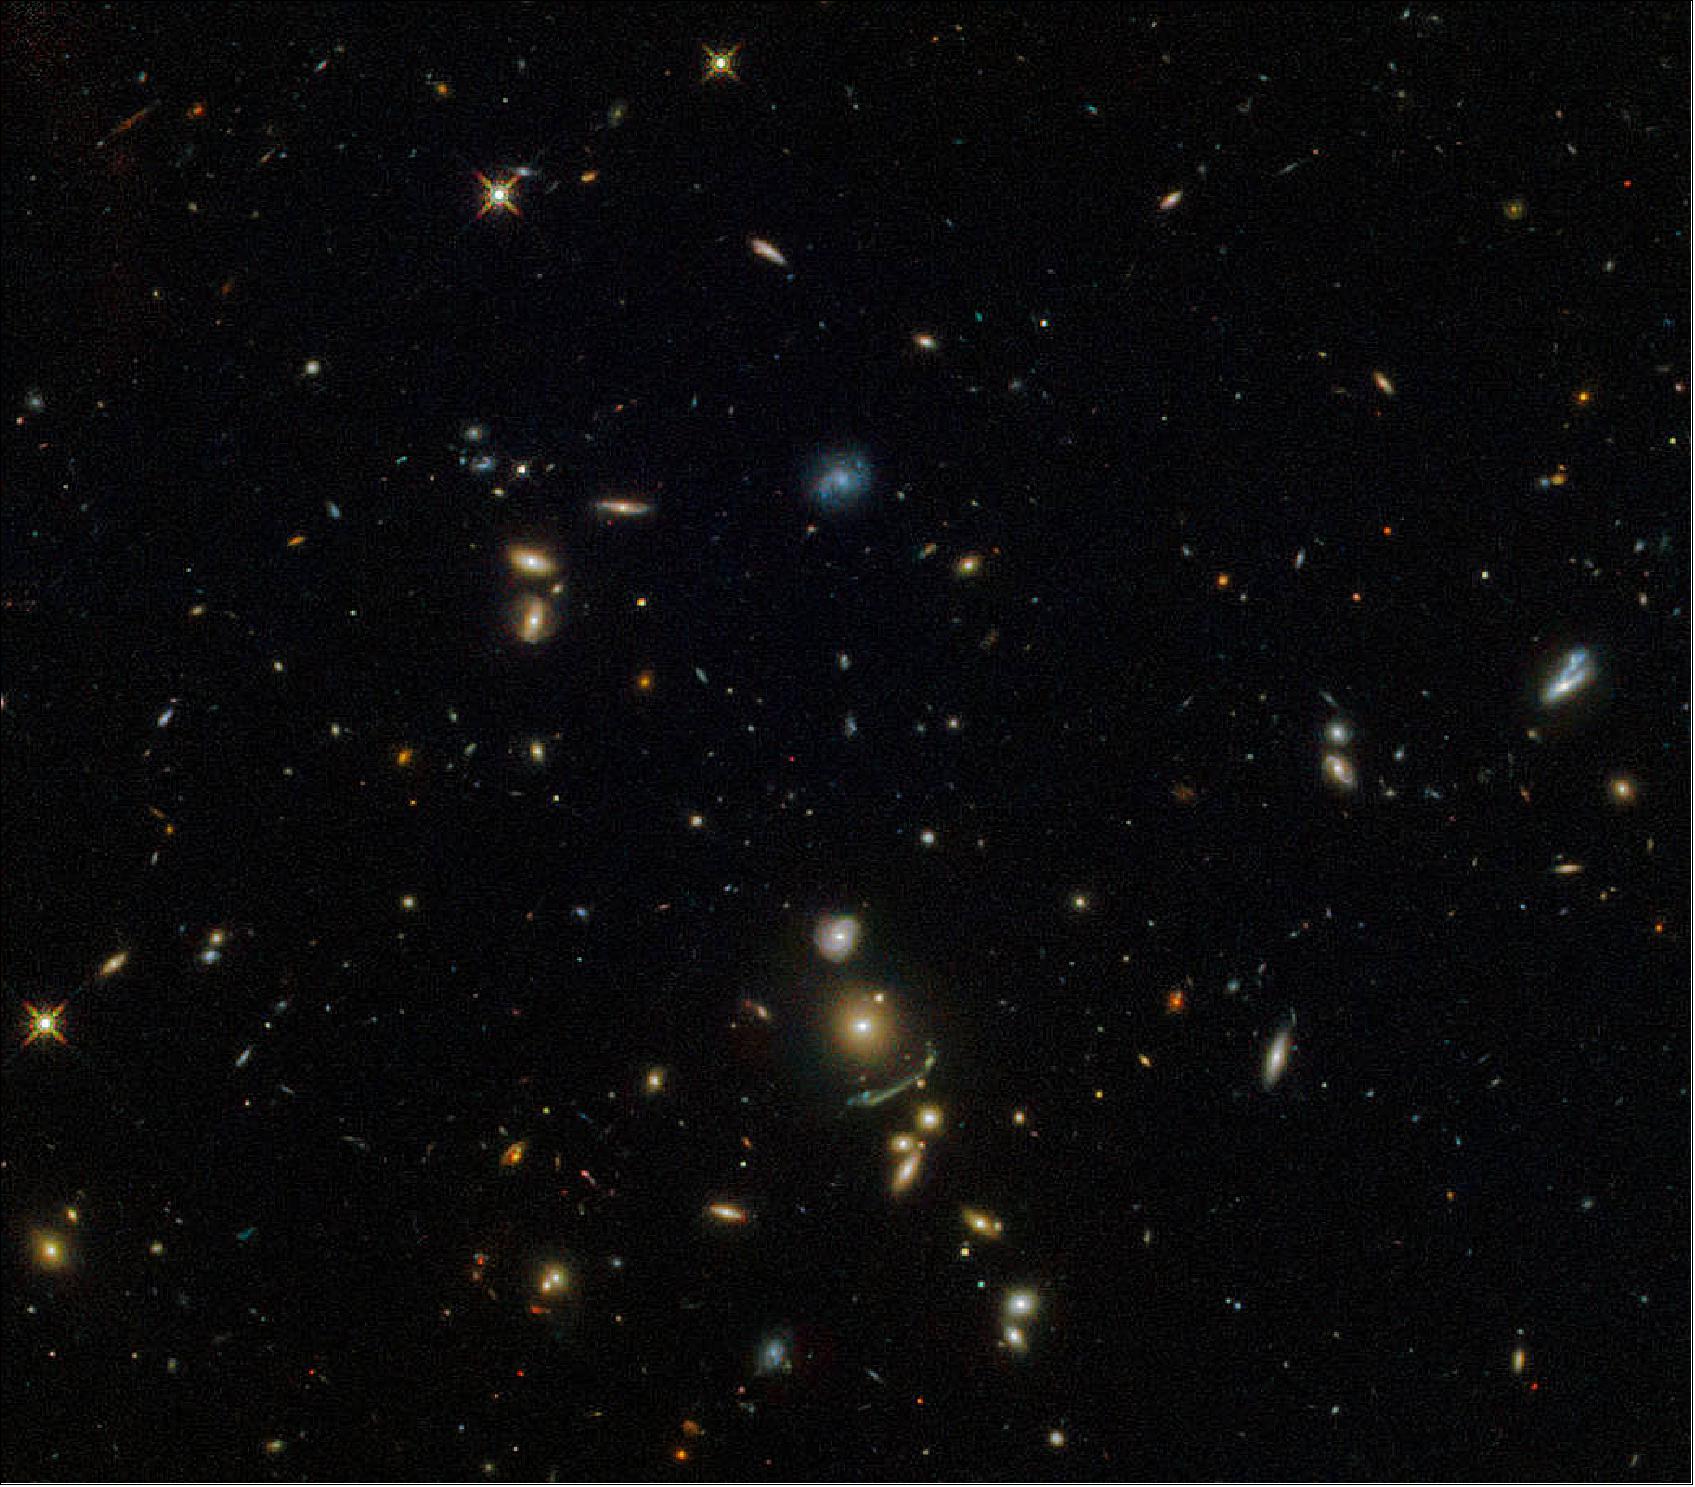 Figure 35: This Hubble image shows a cluster of hundreds of galaxies located about 7.5 billion light-years from Earth (image credit: ESA/Hubble & NASA; Acknowledgment: Judy Schmidt (Geckzilla))